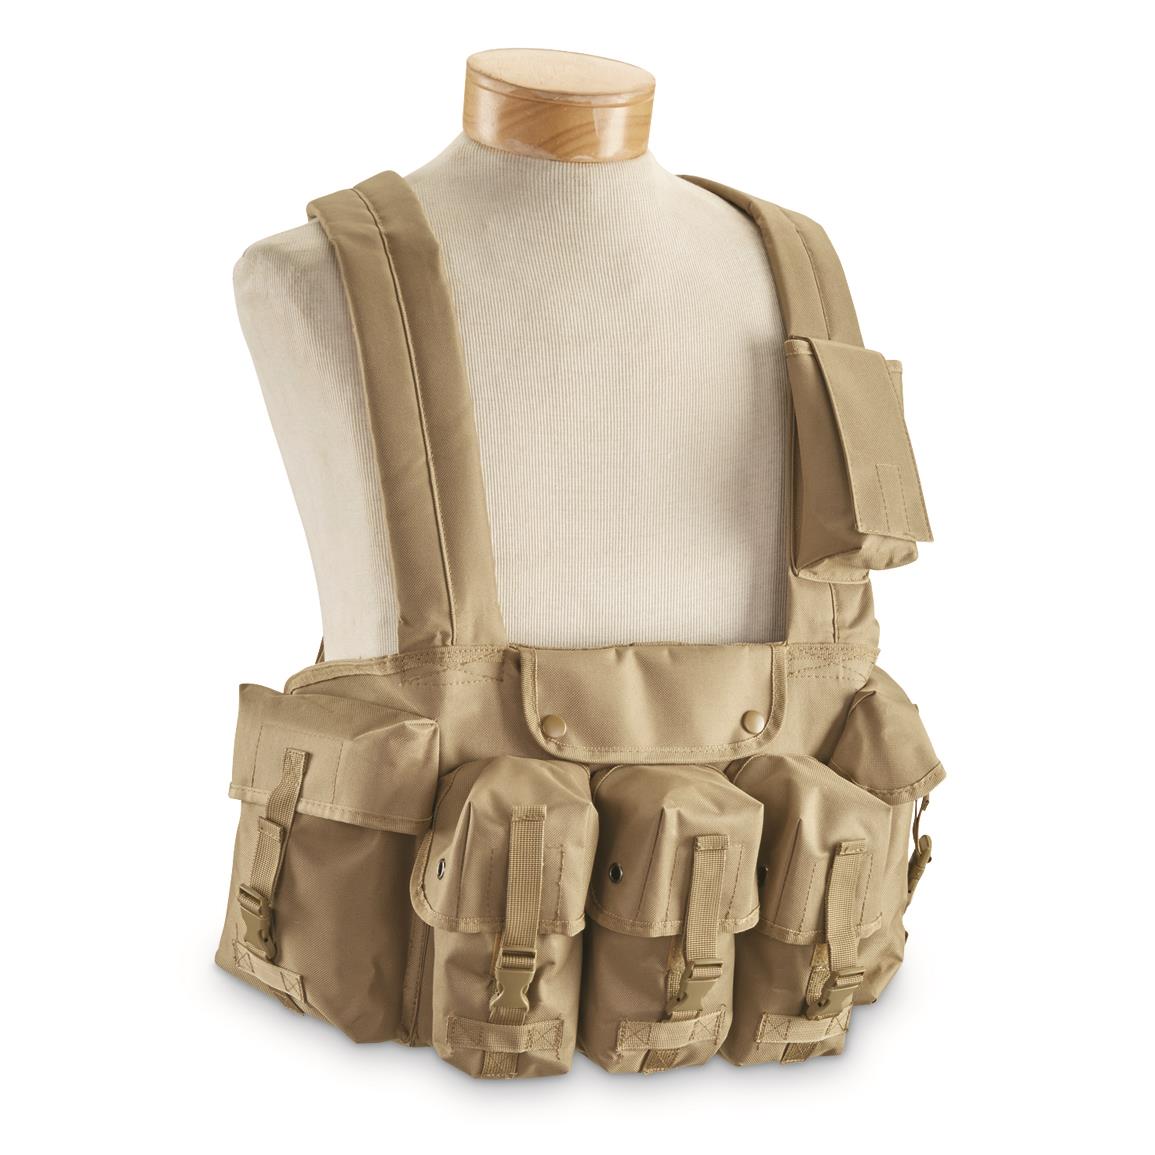 Mil-Tec Military Style Chest Rig - 700374, Chest Rigs & Tactical Vests ...